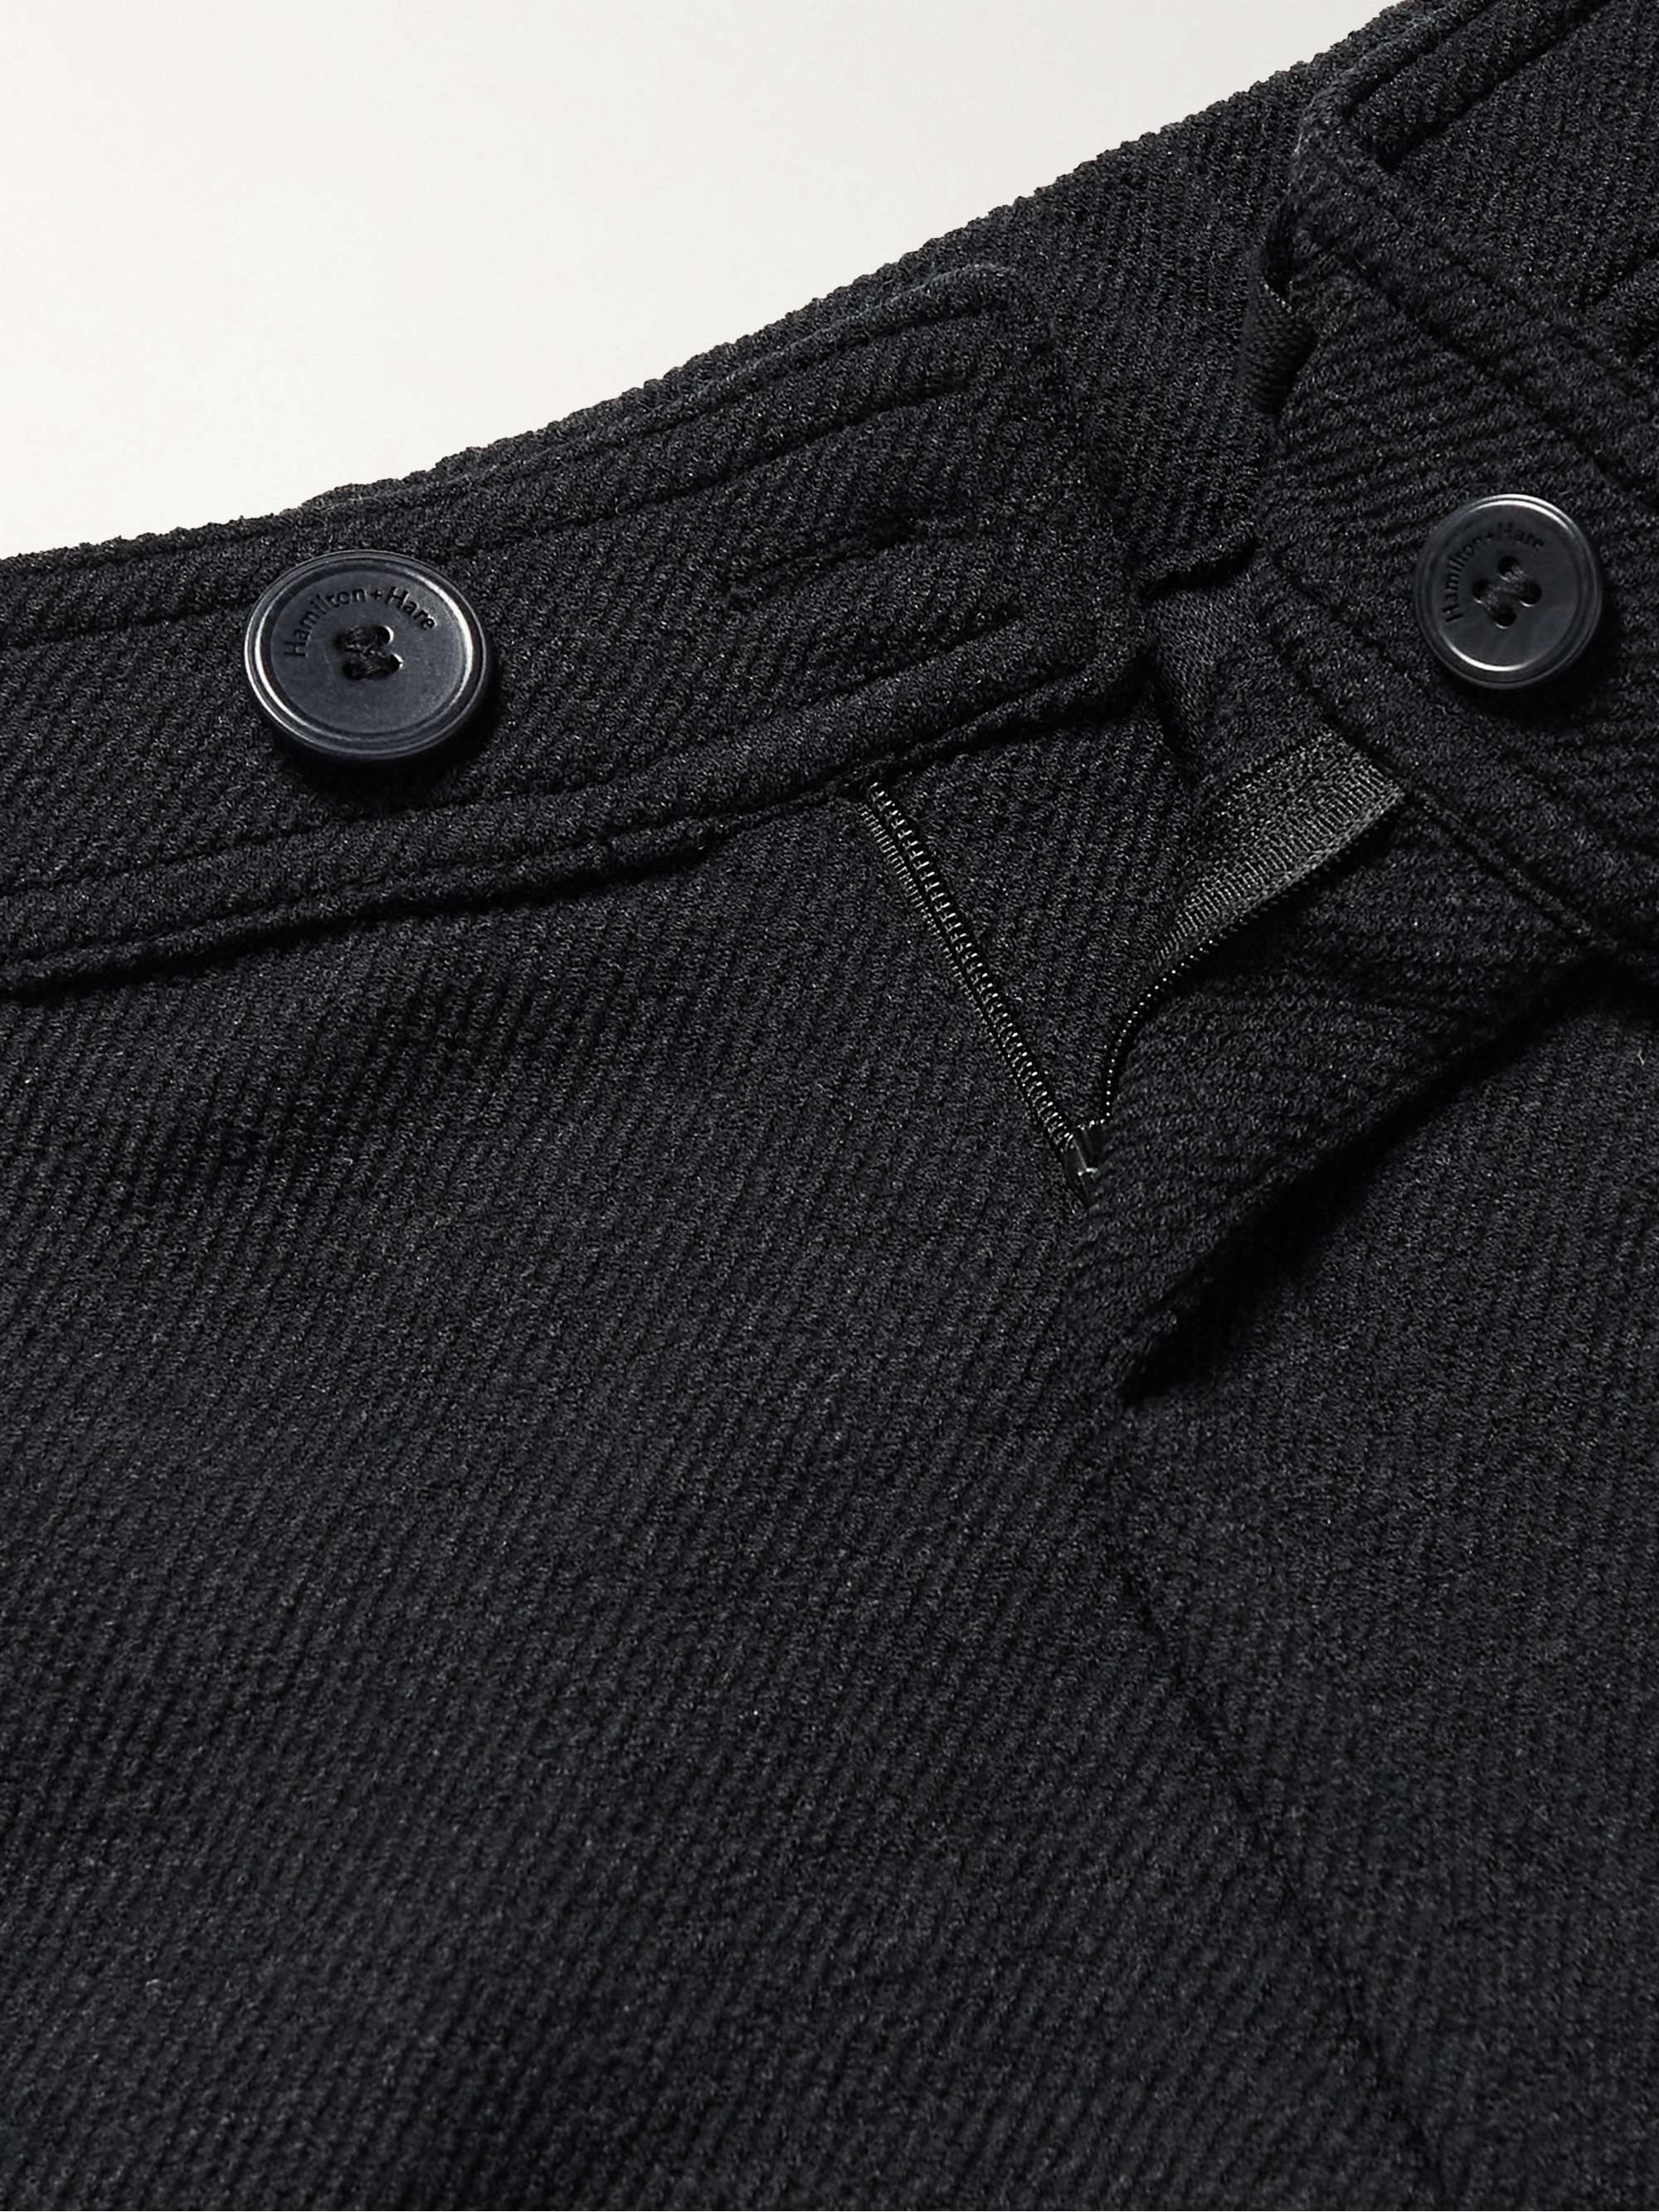 HAMILTON AND HARE Luxe Lounge Slim-Fit Merino Wool-Jersey Trousers